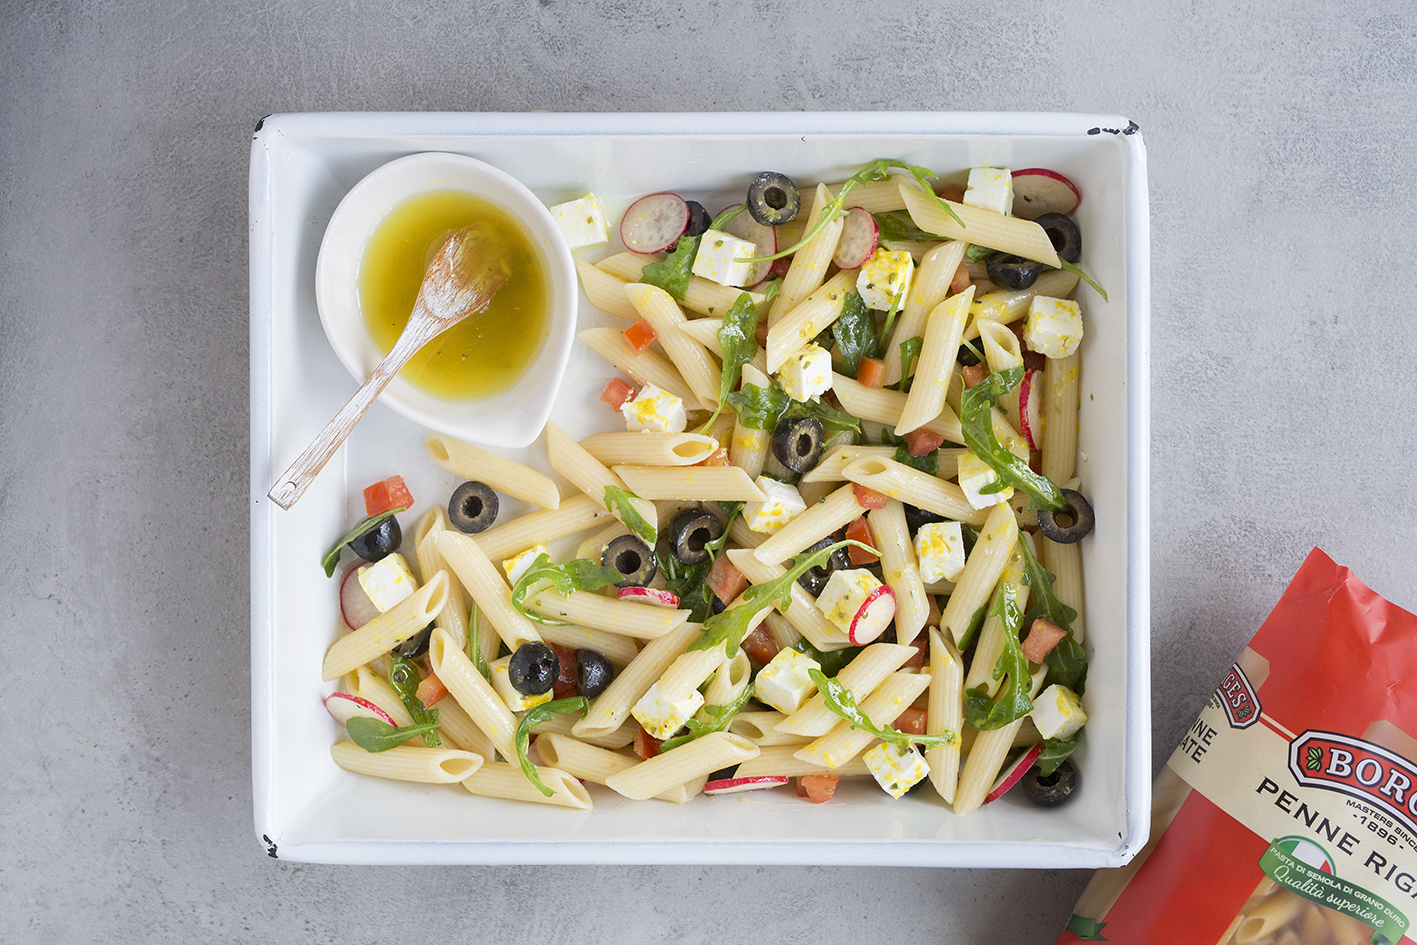 Cold pasta salad recipe with Borges extra virgin olive oil